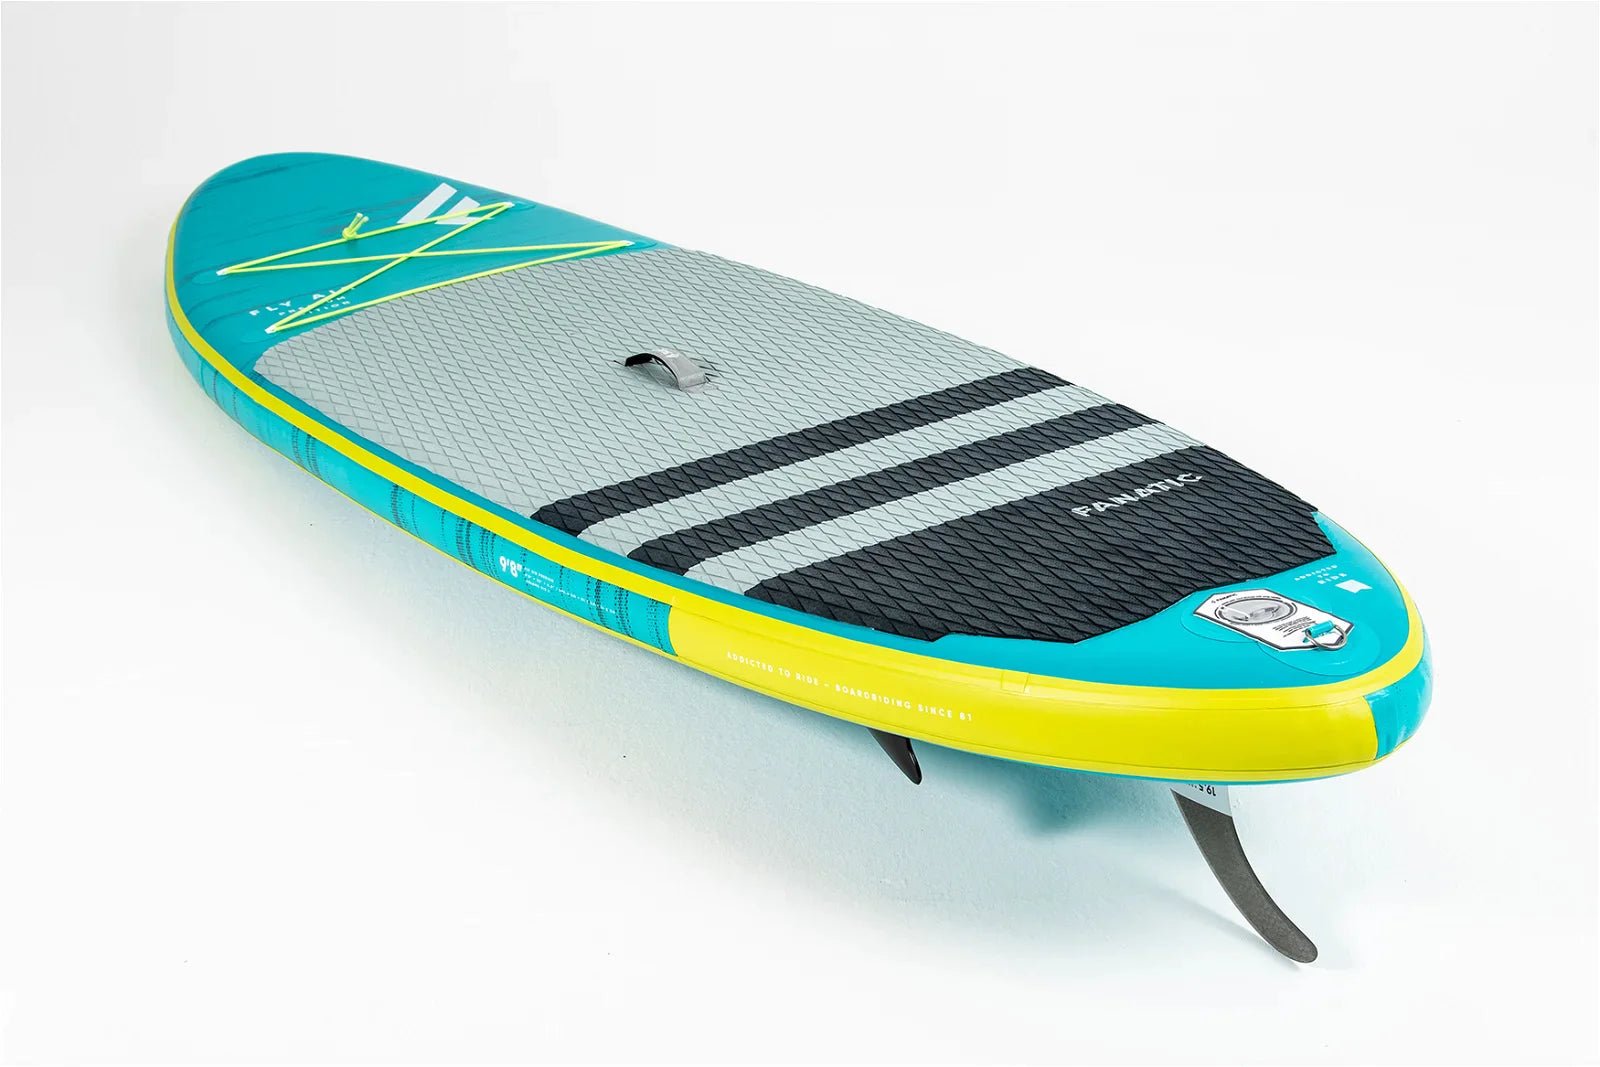 Used Fanatic Fly Air Premium 2022 Ex Demo Used - Worthing Watersports - SUP Inflatables - Ex Demo